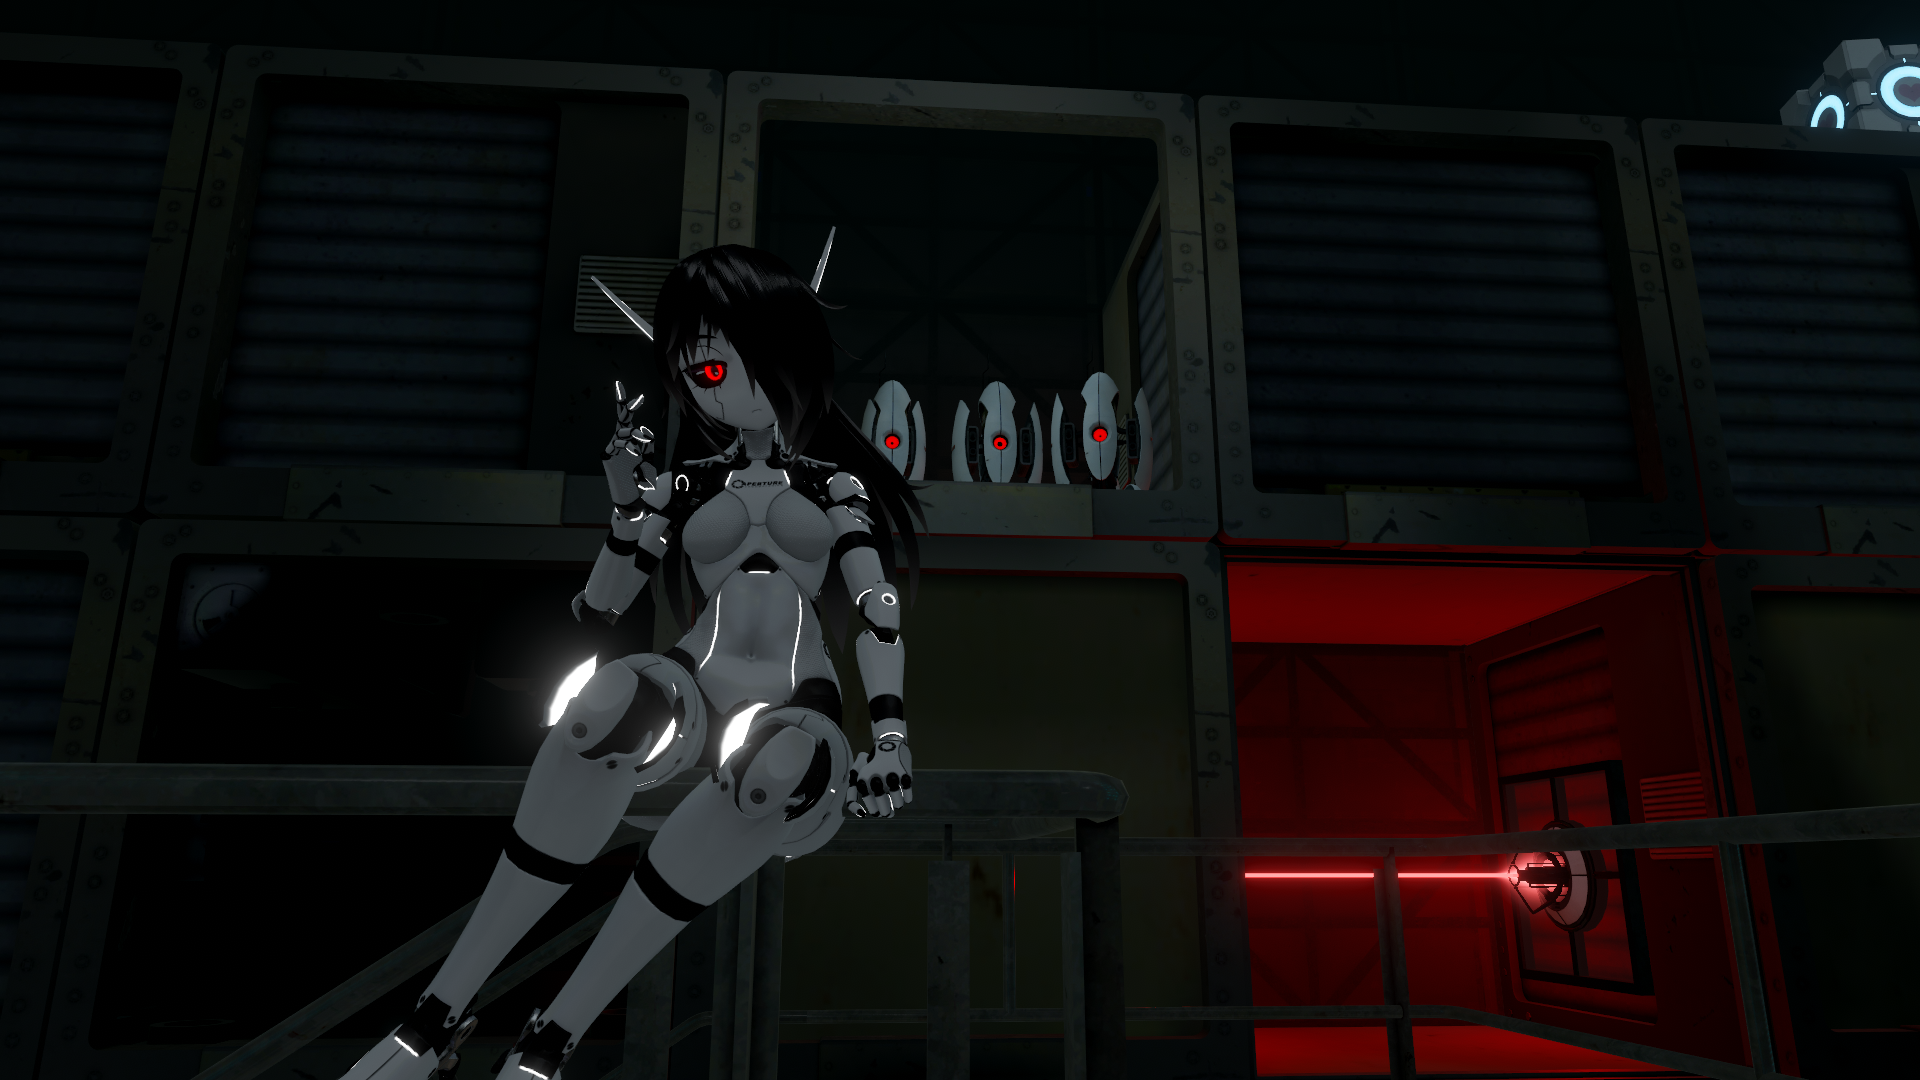 VRChat_2023-01-24_09-58-08.207_1920x1080.png